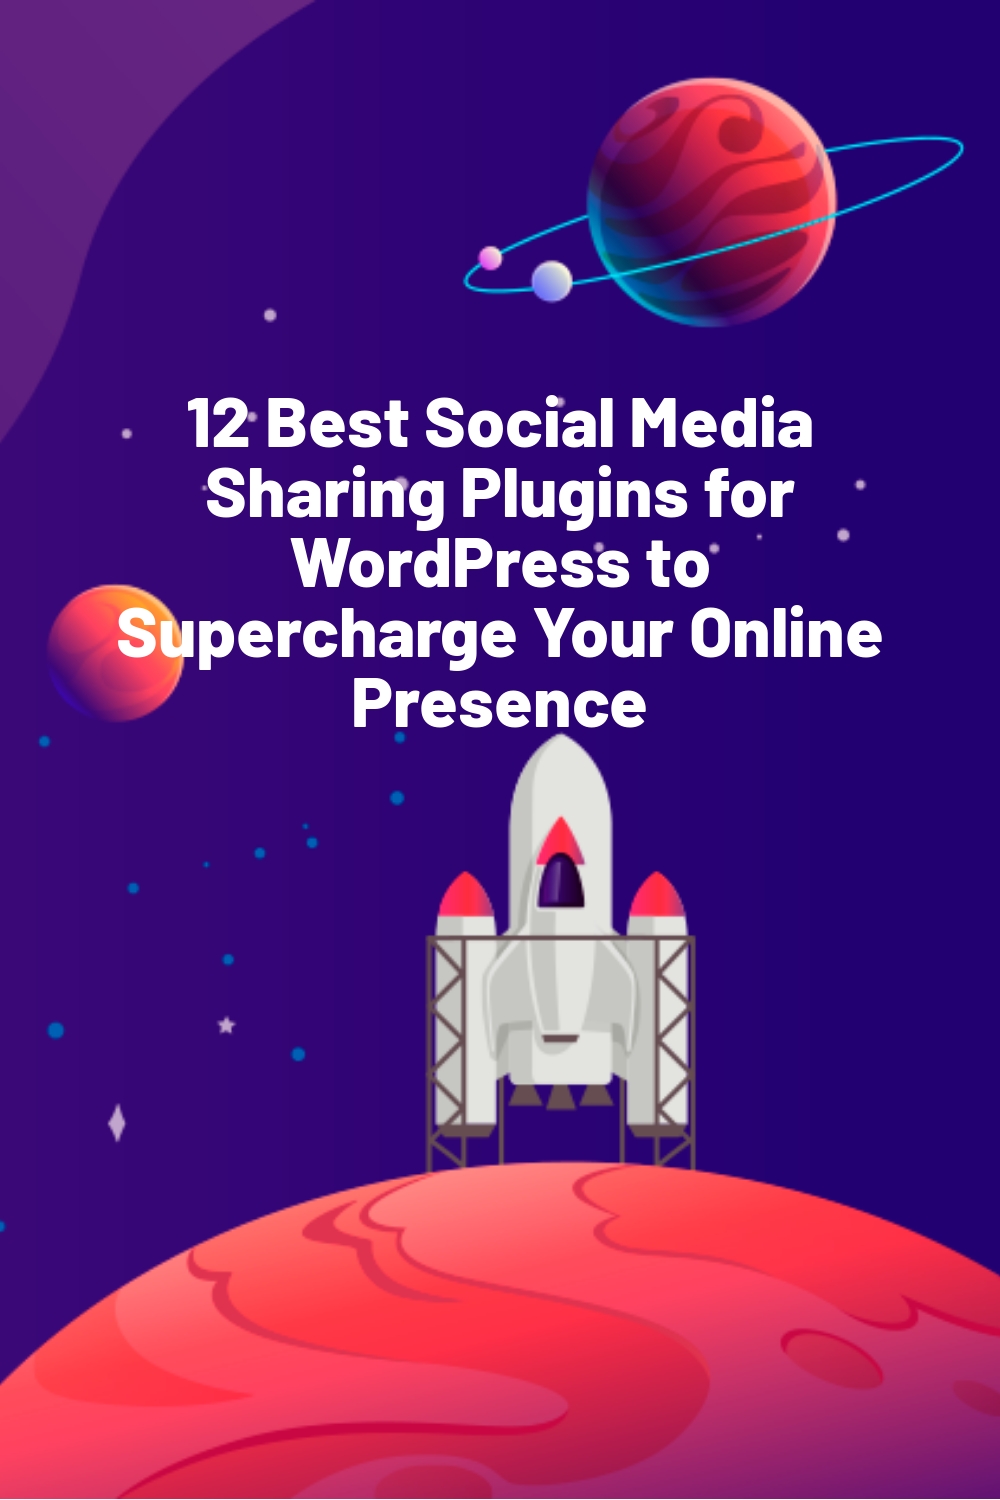 12 Best Social Media Sharing Plugins for WordPress to Supercharge Your Online Presence